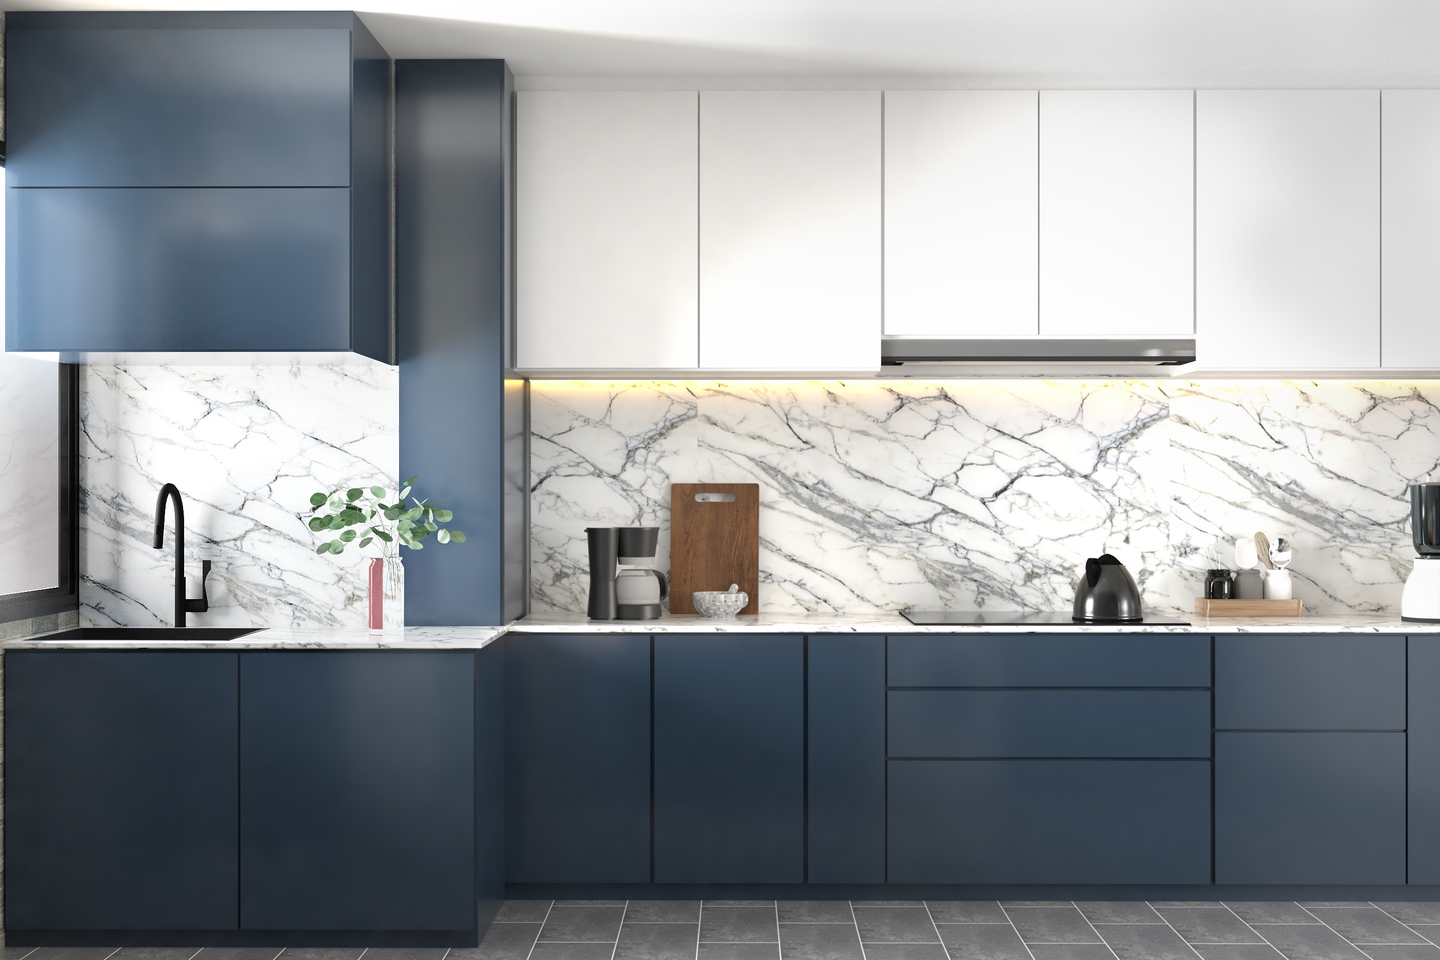 Marble Finish Tiles Kitchen Design with Fridge and Storage - Livspace